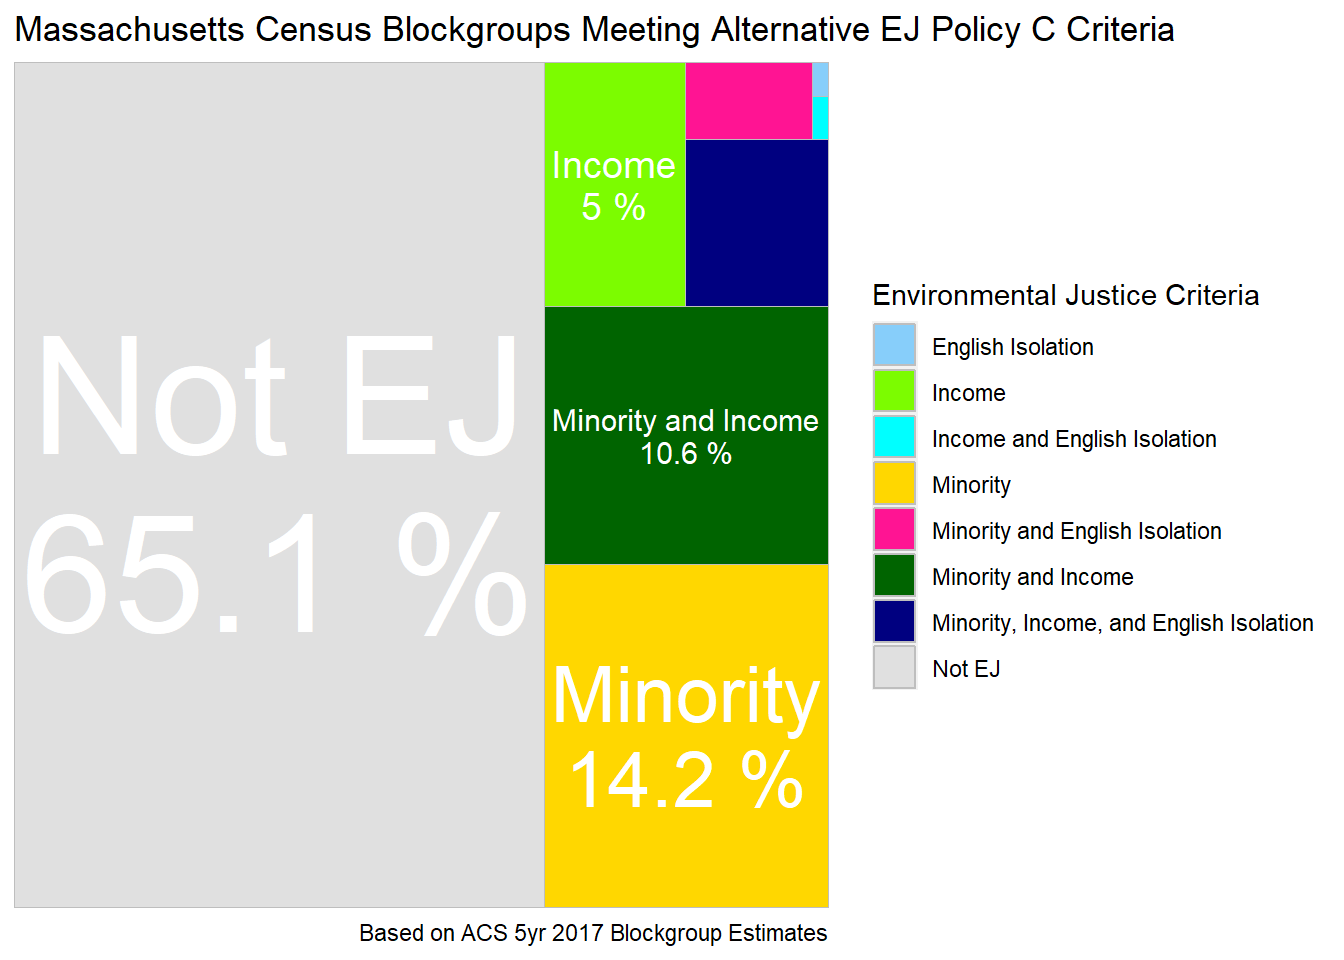 Tree map of block groups classified as environmental justice by Alternative EJ Policy C - Modify Minority and English Isolation Criteria by Income.